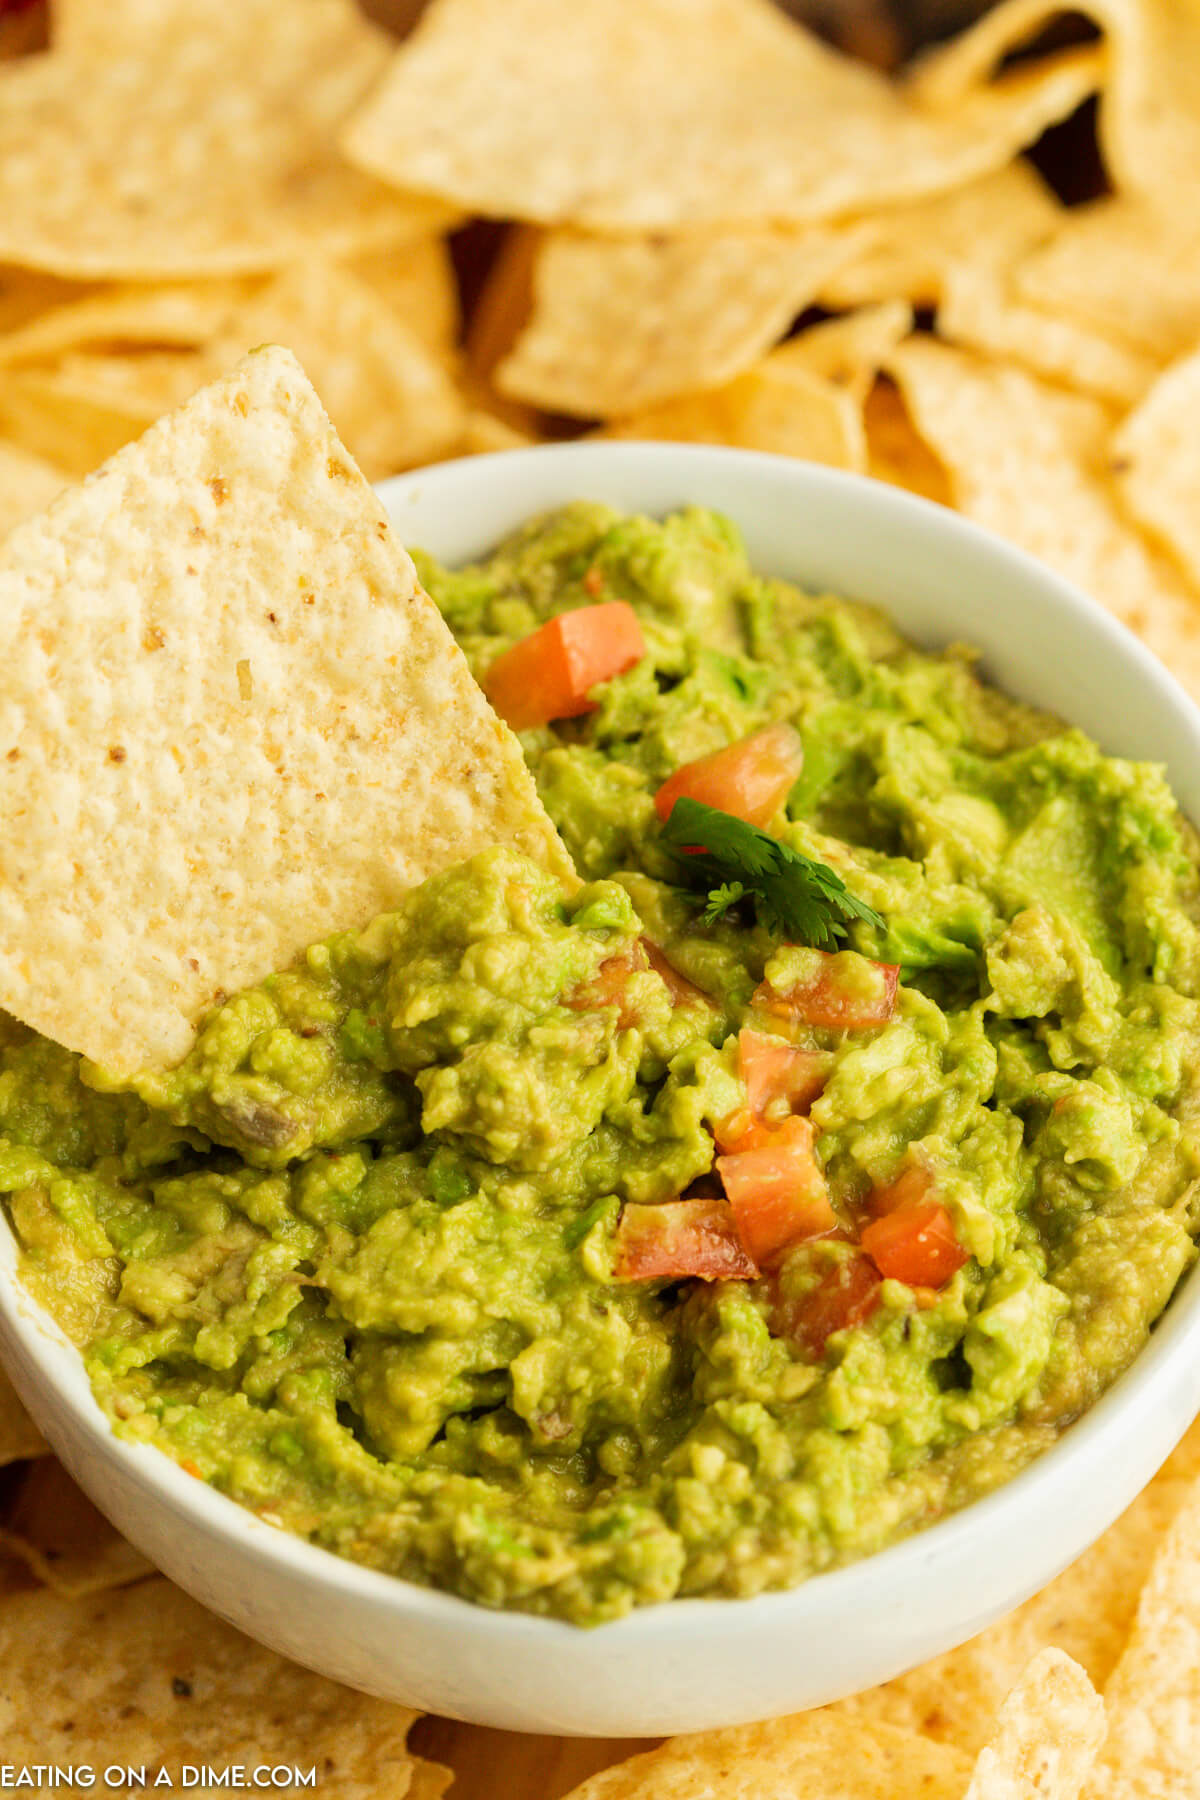 Guacamole in a bowl with a tortilla chips dipping in the bowl of guacamole